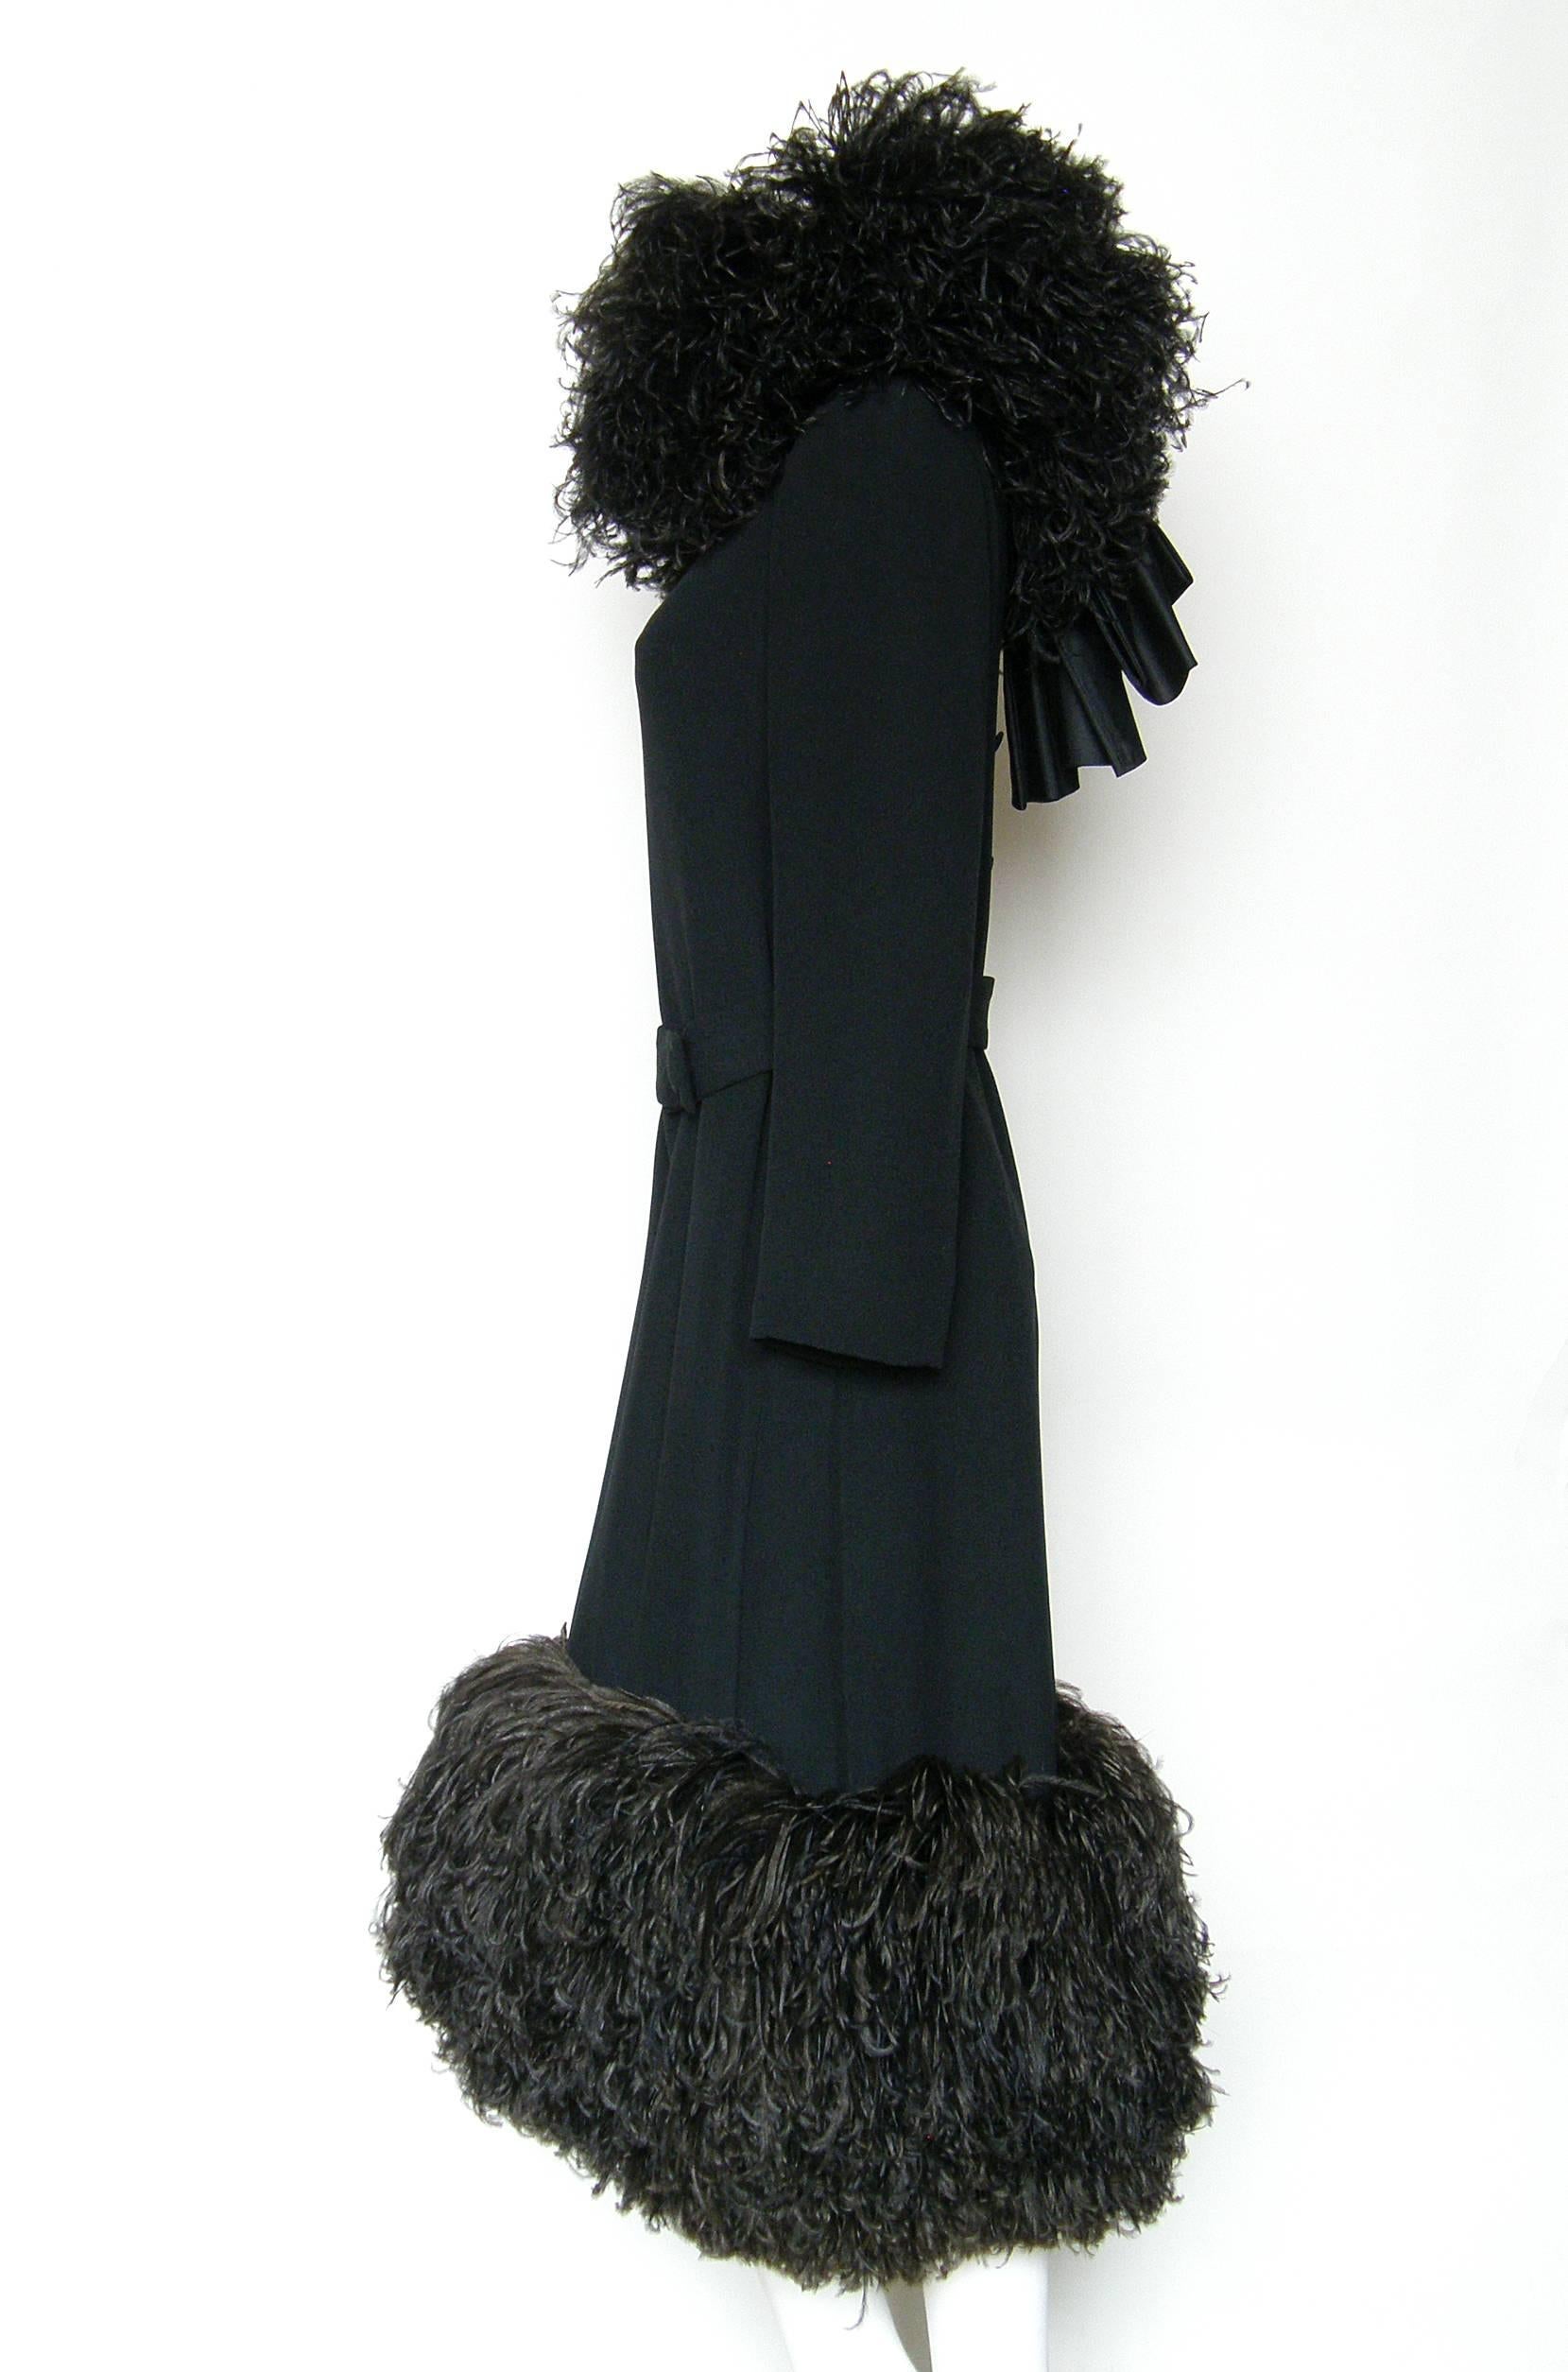 Women's Norman Norell Evening Dress with Ostrich Feathers